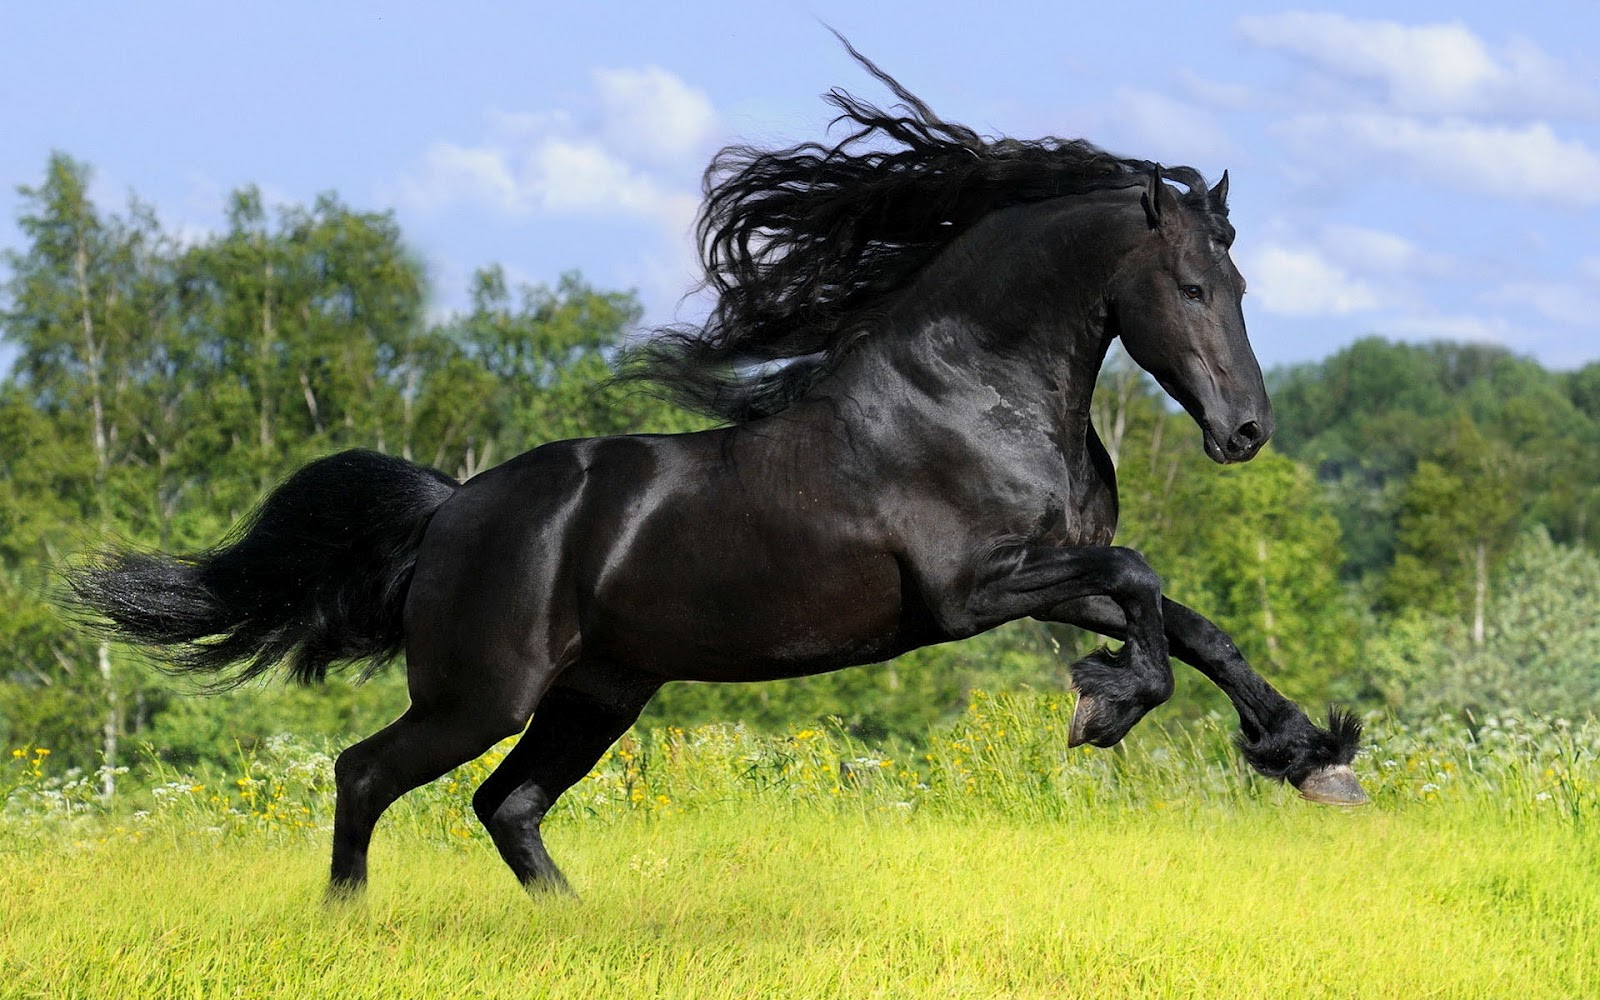 http://7-themes.com/data_images/out/35/6889908-black-horse-wallpaper.jpg